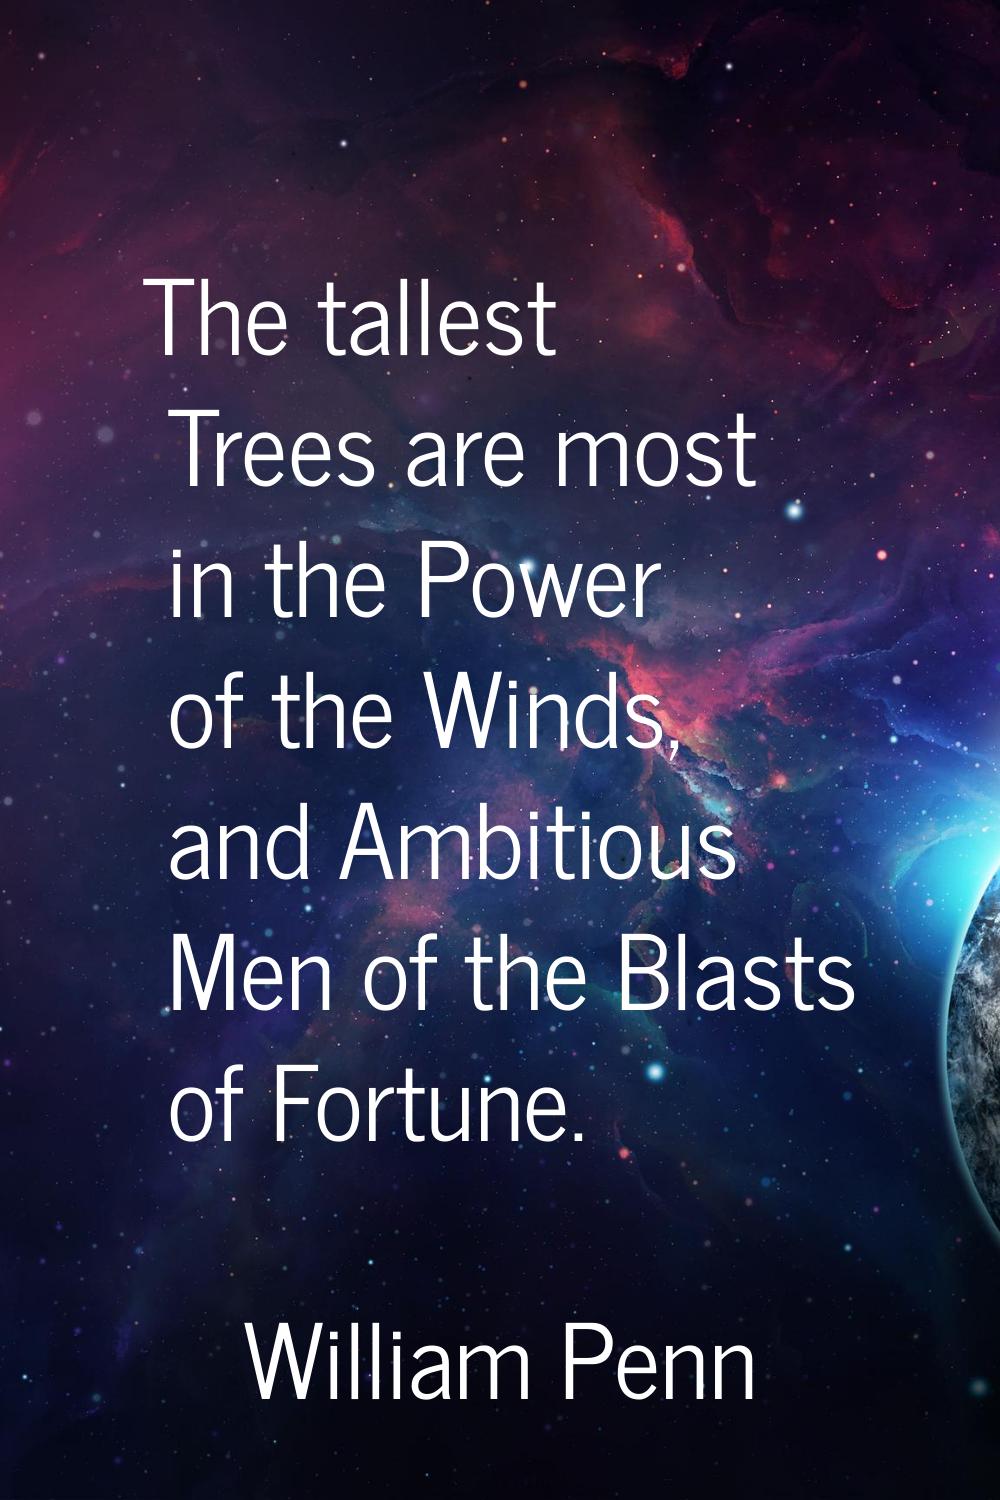 The tallest Trees are most in the Power of the Winds, and Ambitious Men of the Blasts of Fortune.